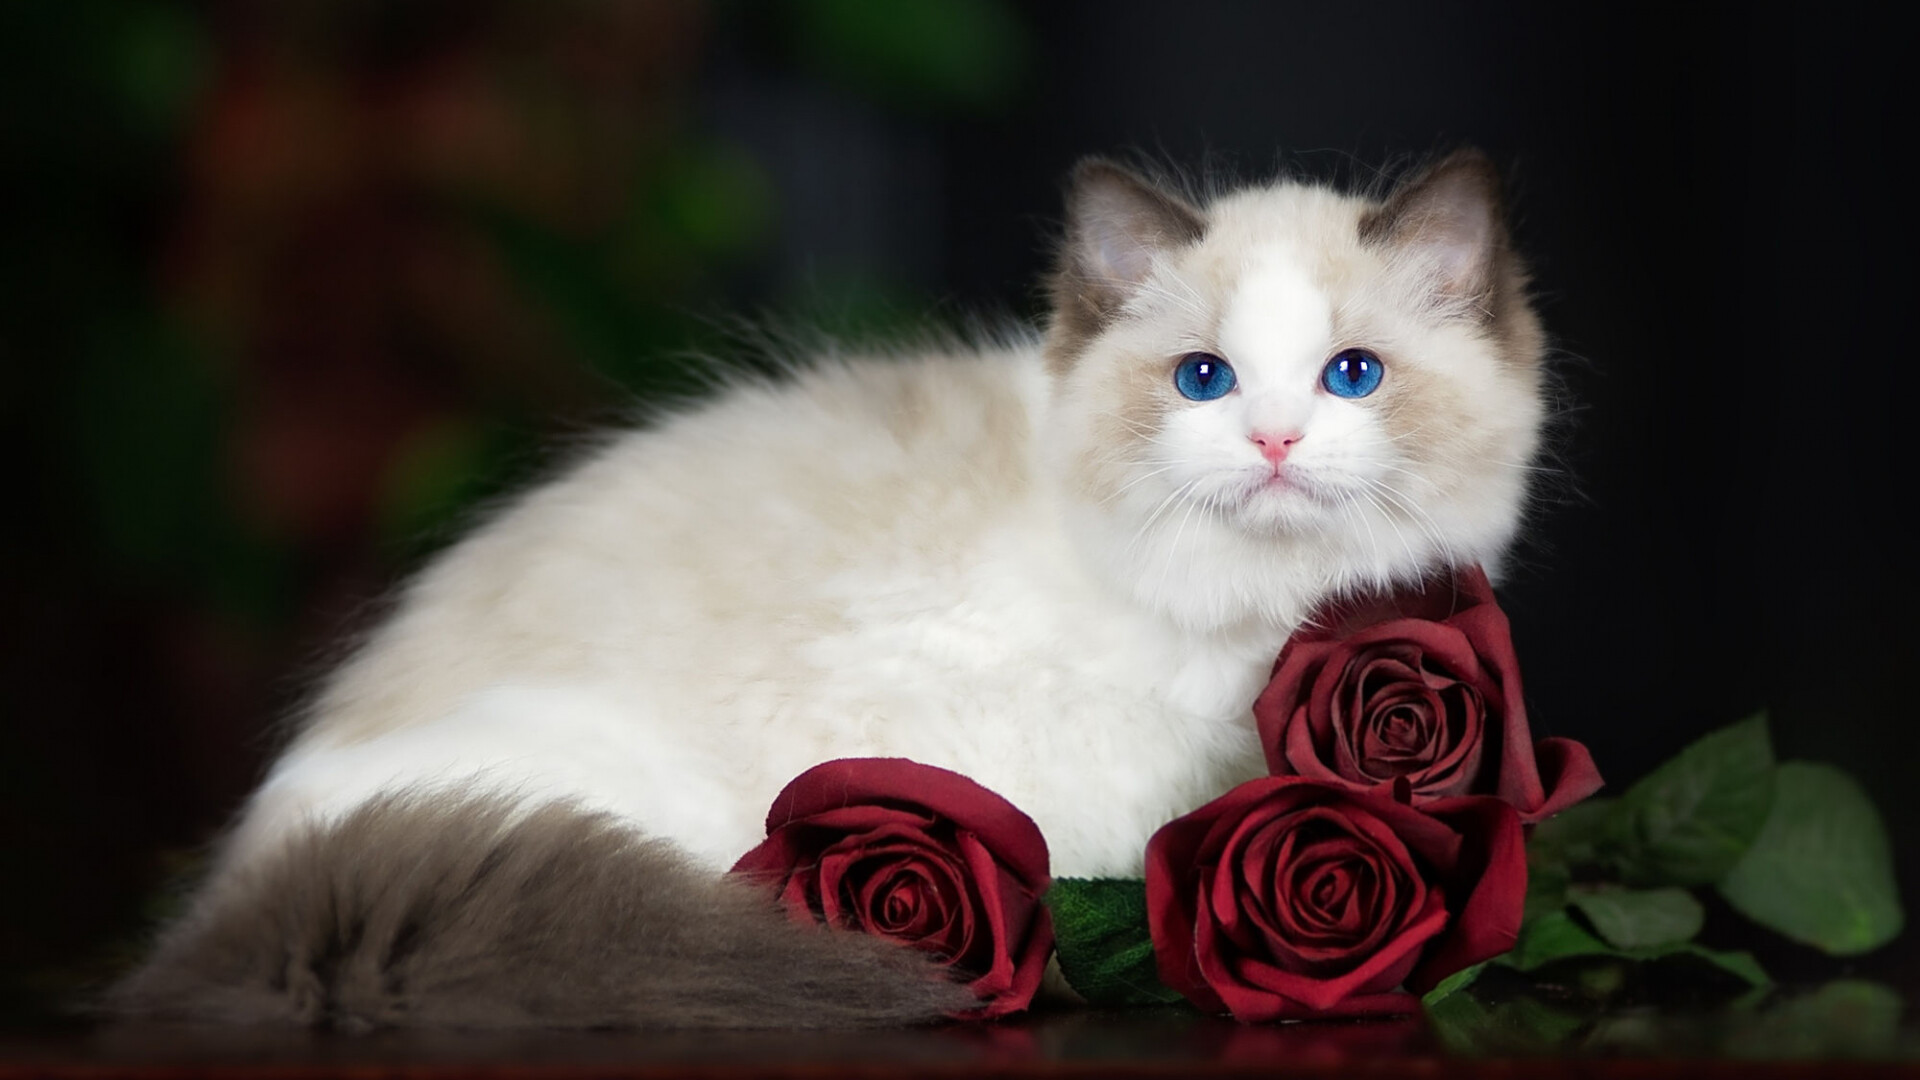 Ragdoll: Ragdolls are perhaps most renowned for their vivid electric-blue eyes. 1920x1080 Full HD Wallpaper.